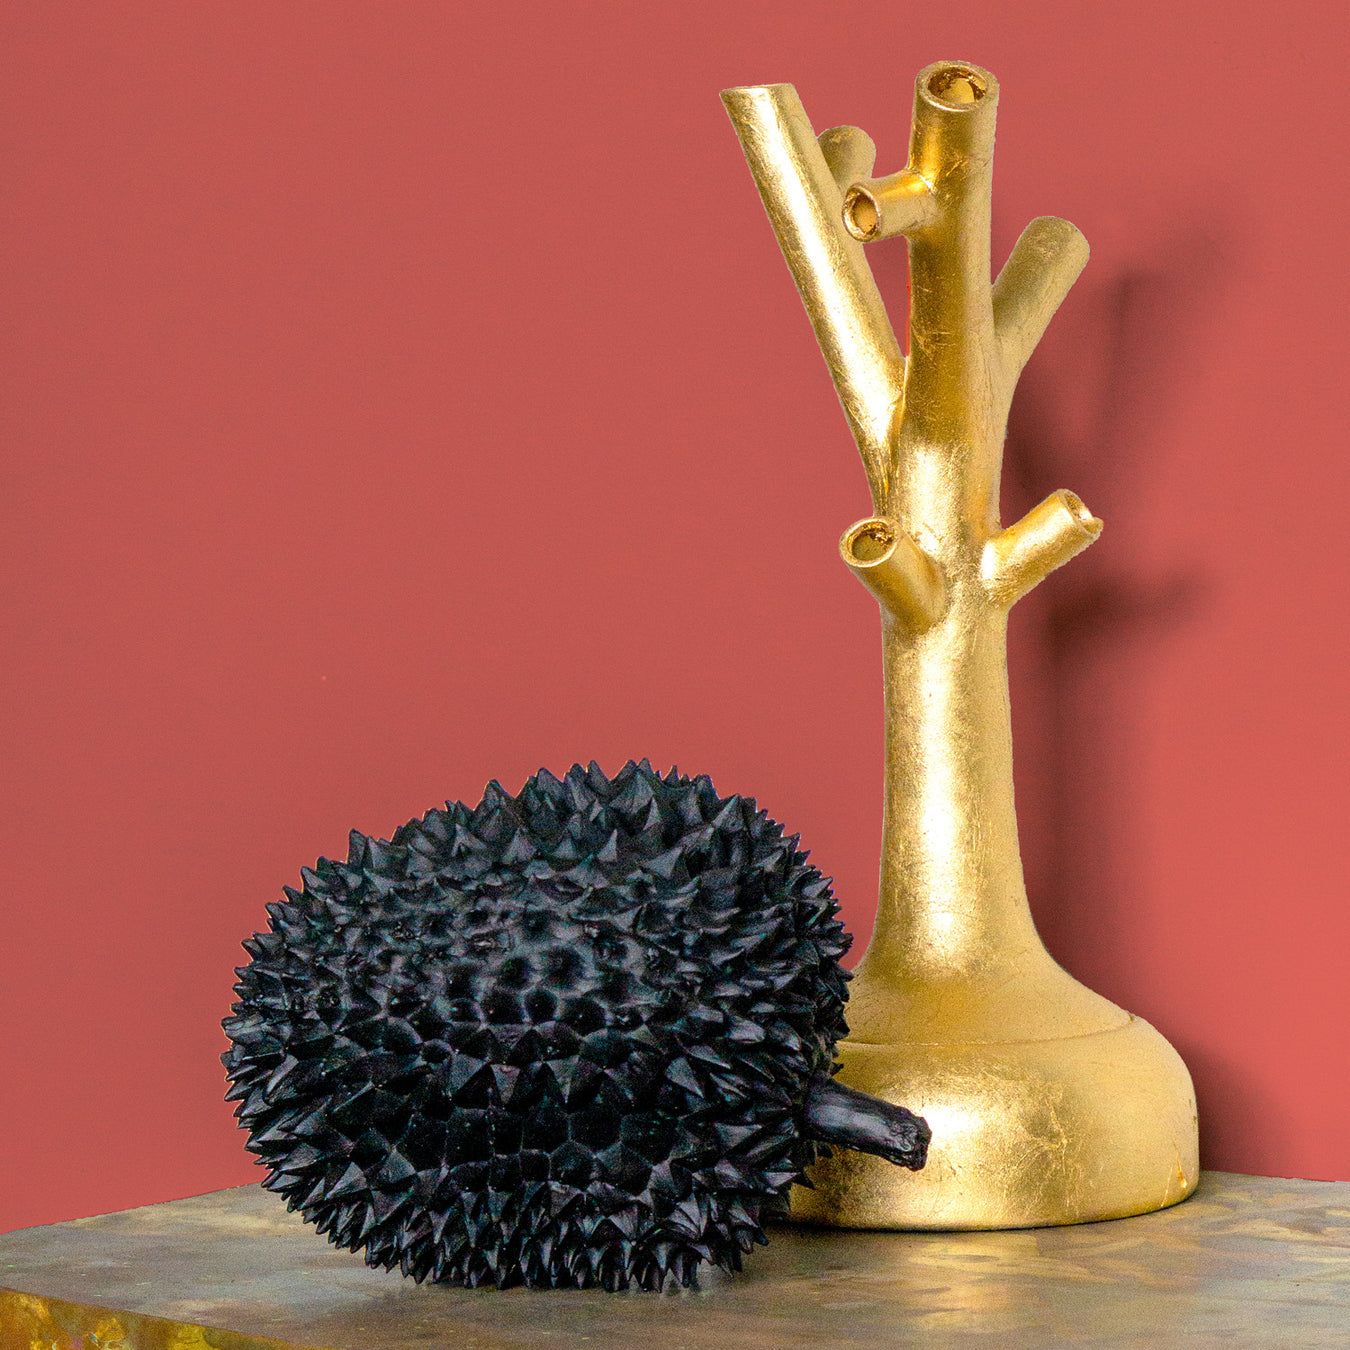 Black Durian sculpture next to a gold leaf Shinzo Tree sculpture against a red wall.